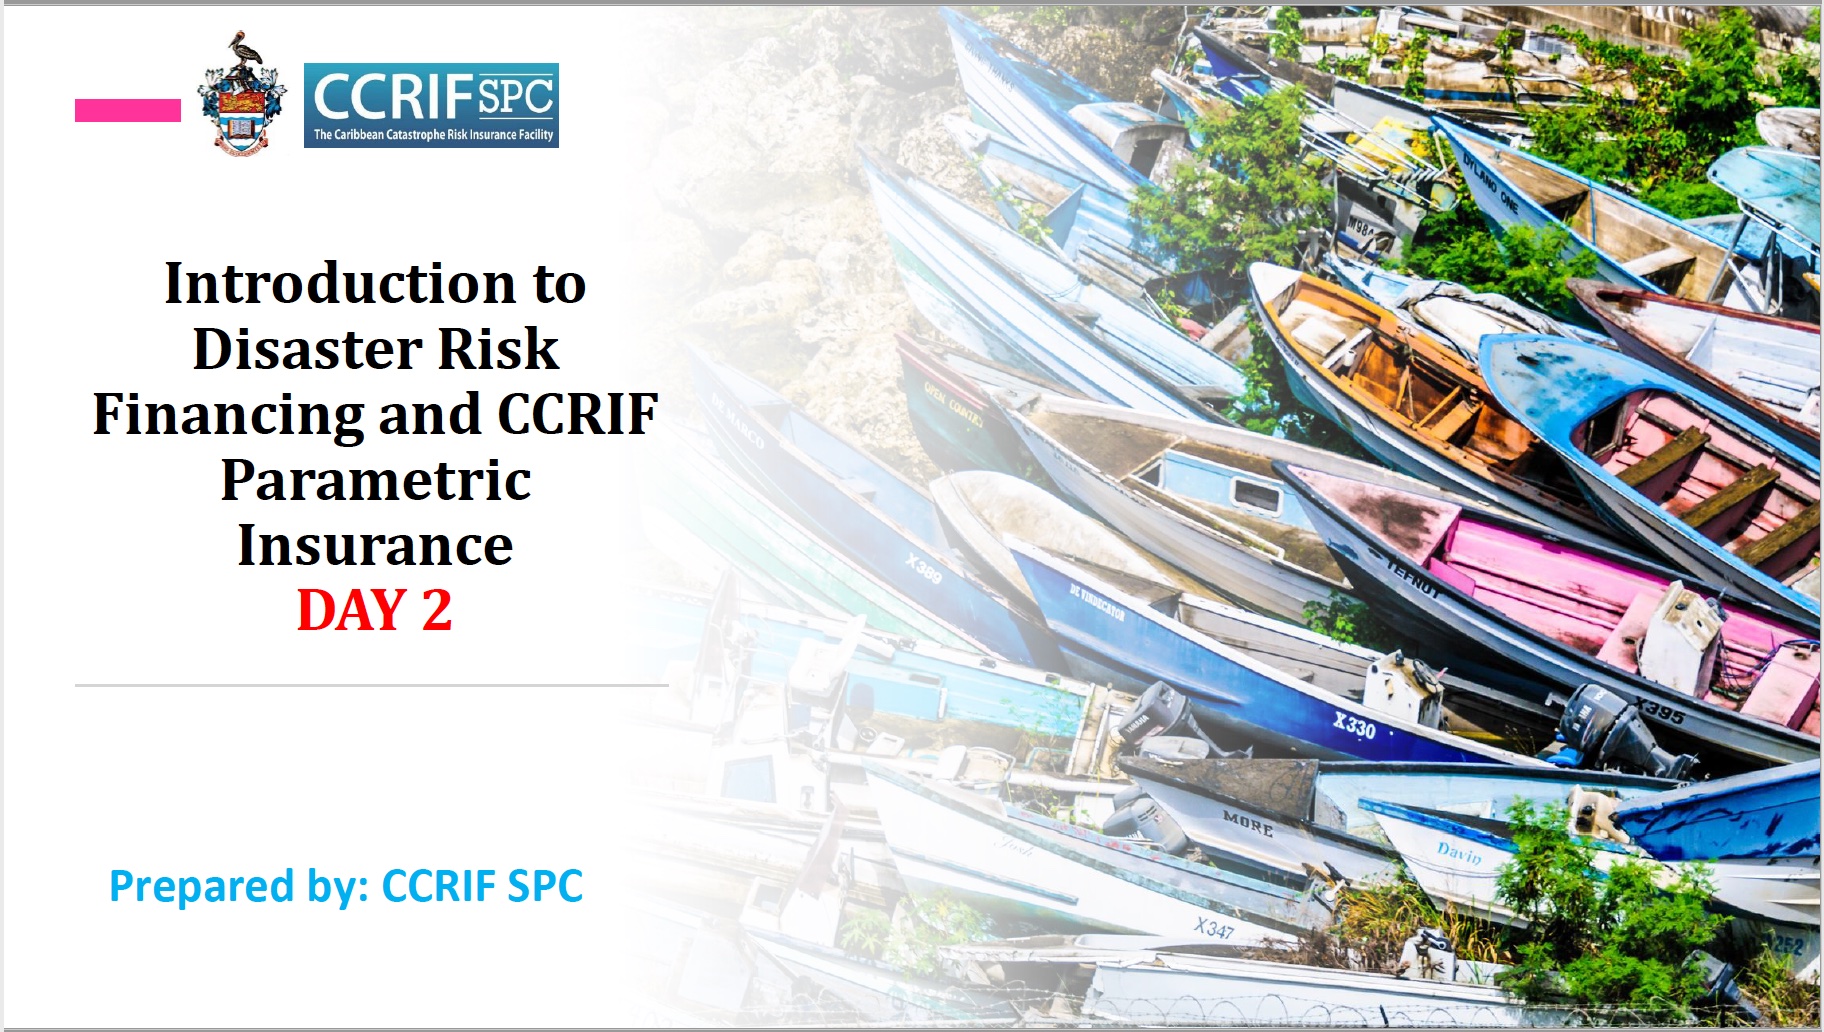 Day 2 - Presentation - Introduction to Disaster Risk Financing and CCRIF Parametric Insurance